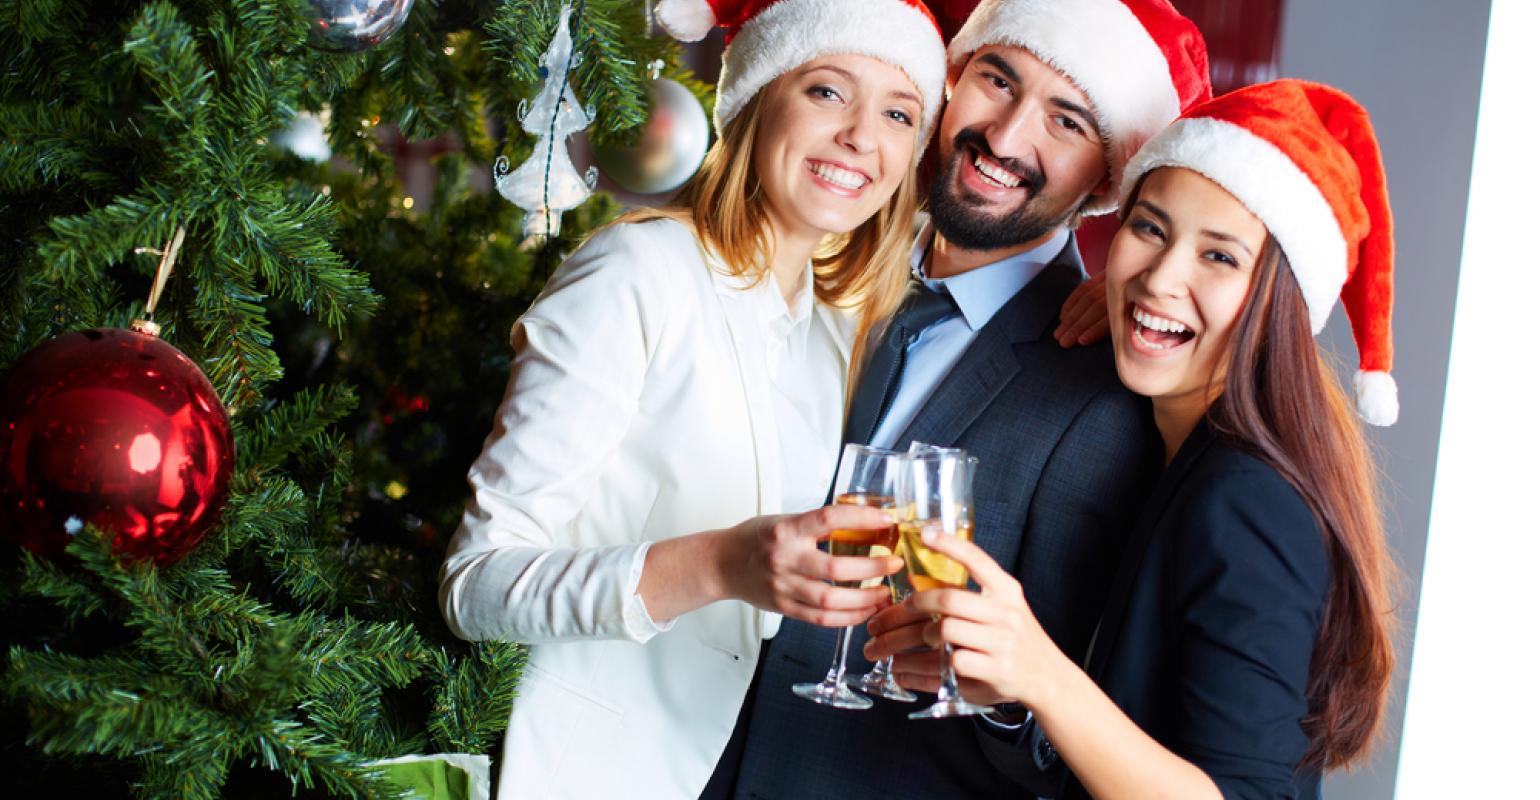 High Resolution Wallpaper | Office Christmas Party 1540x800 px